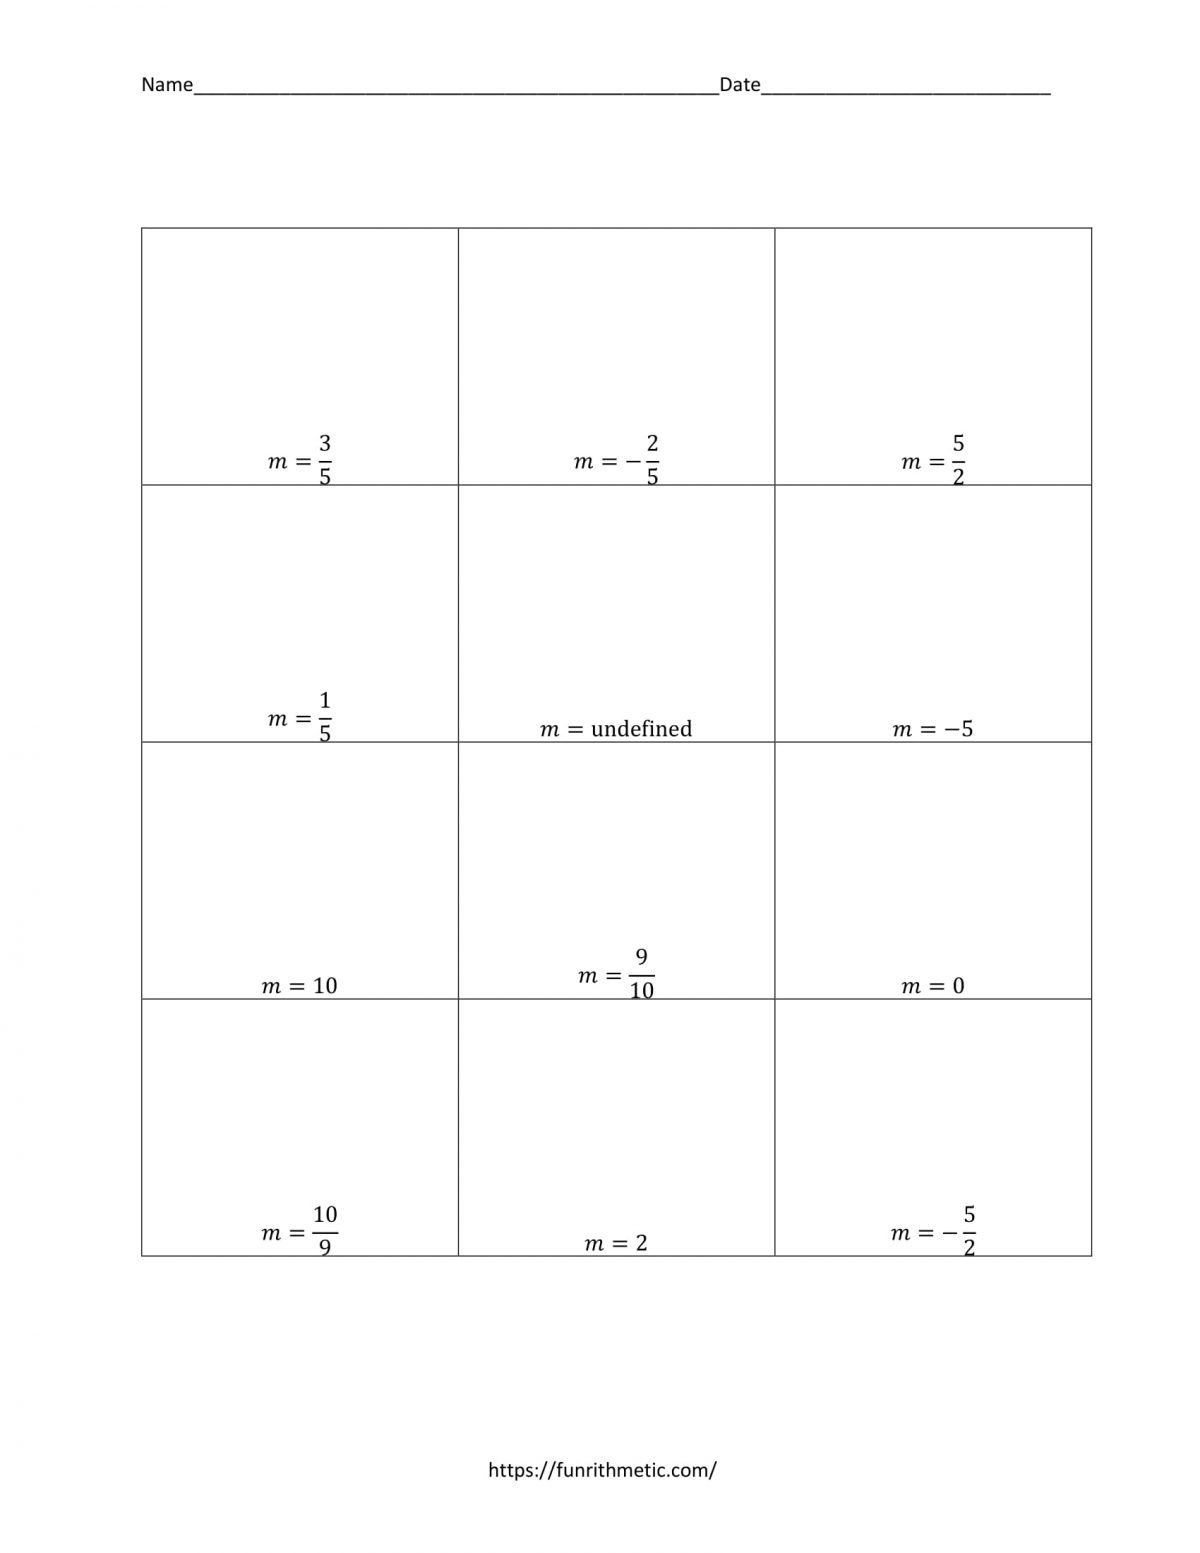 slope using a graph worksheet